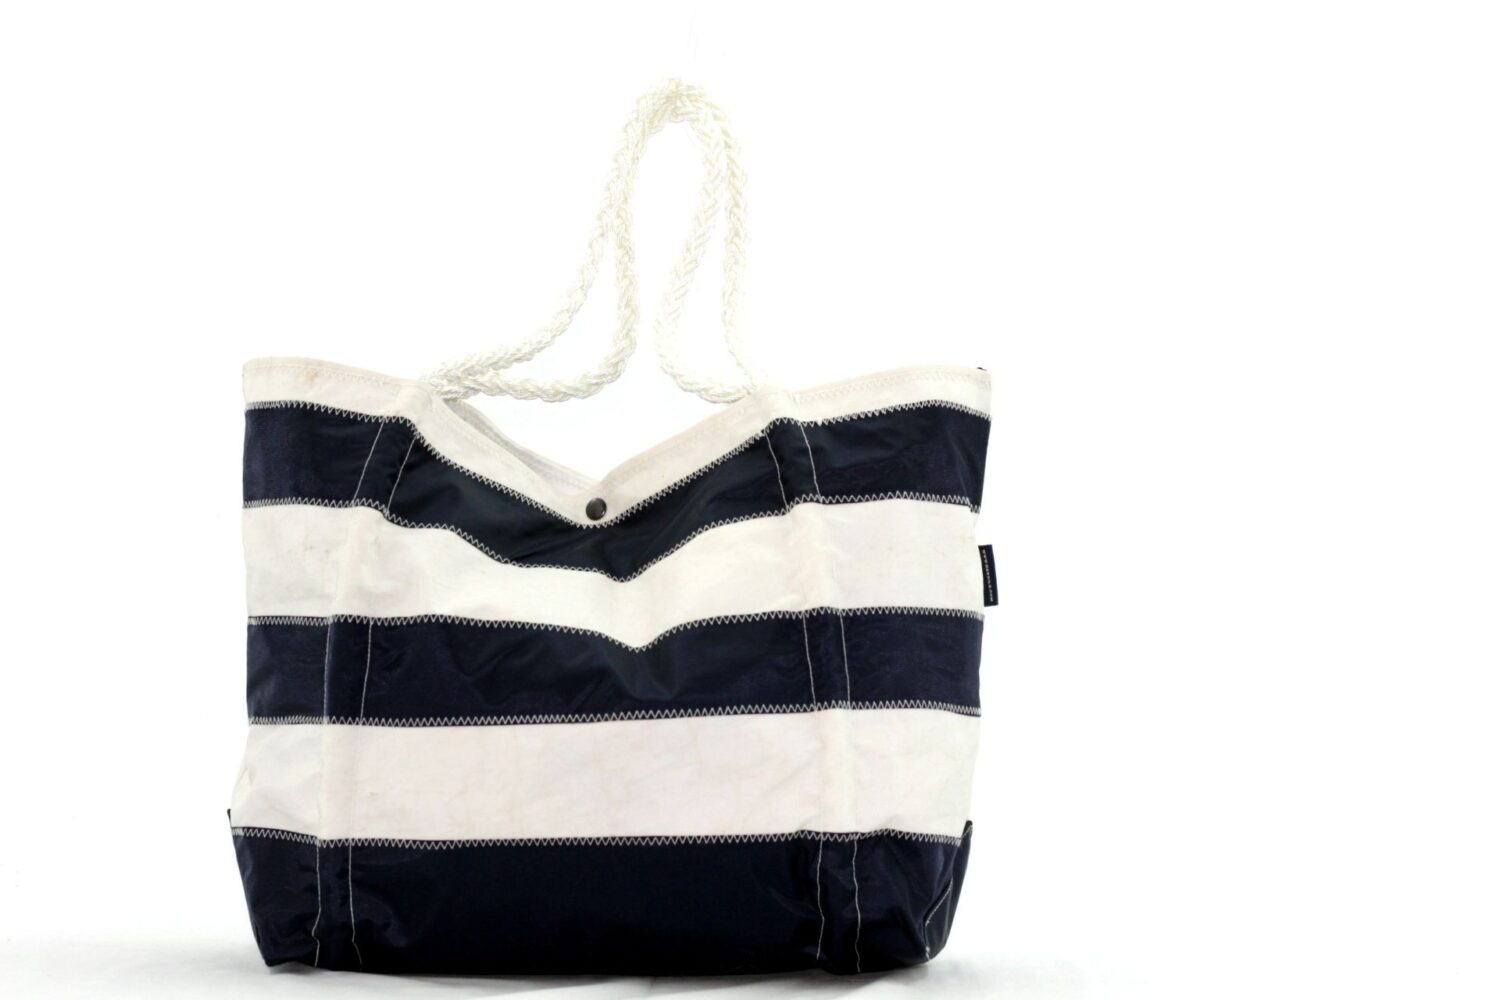 Stripped Rope Tote - Hooley